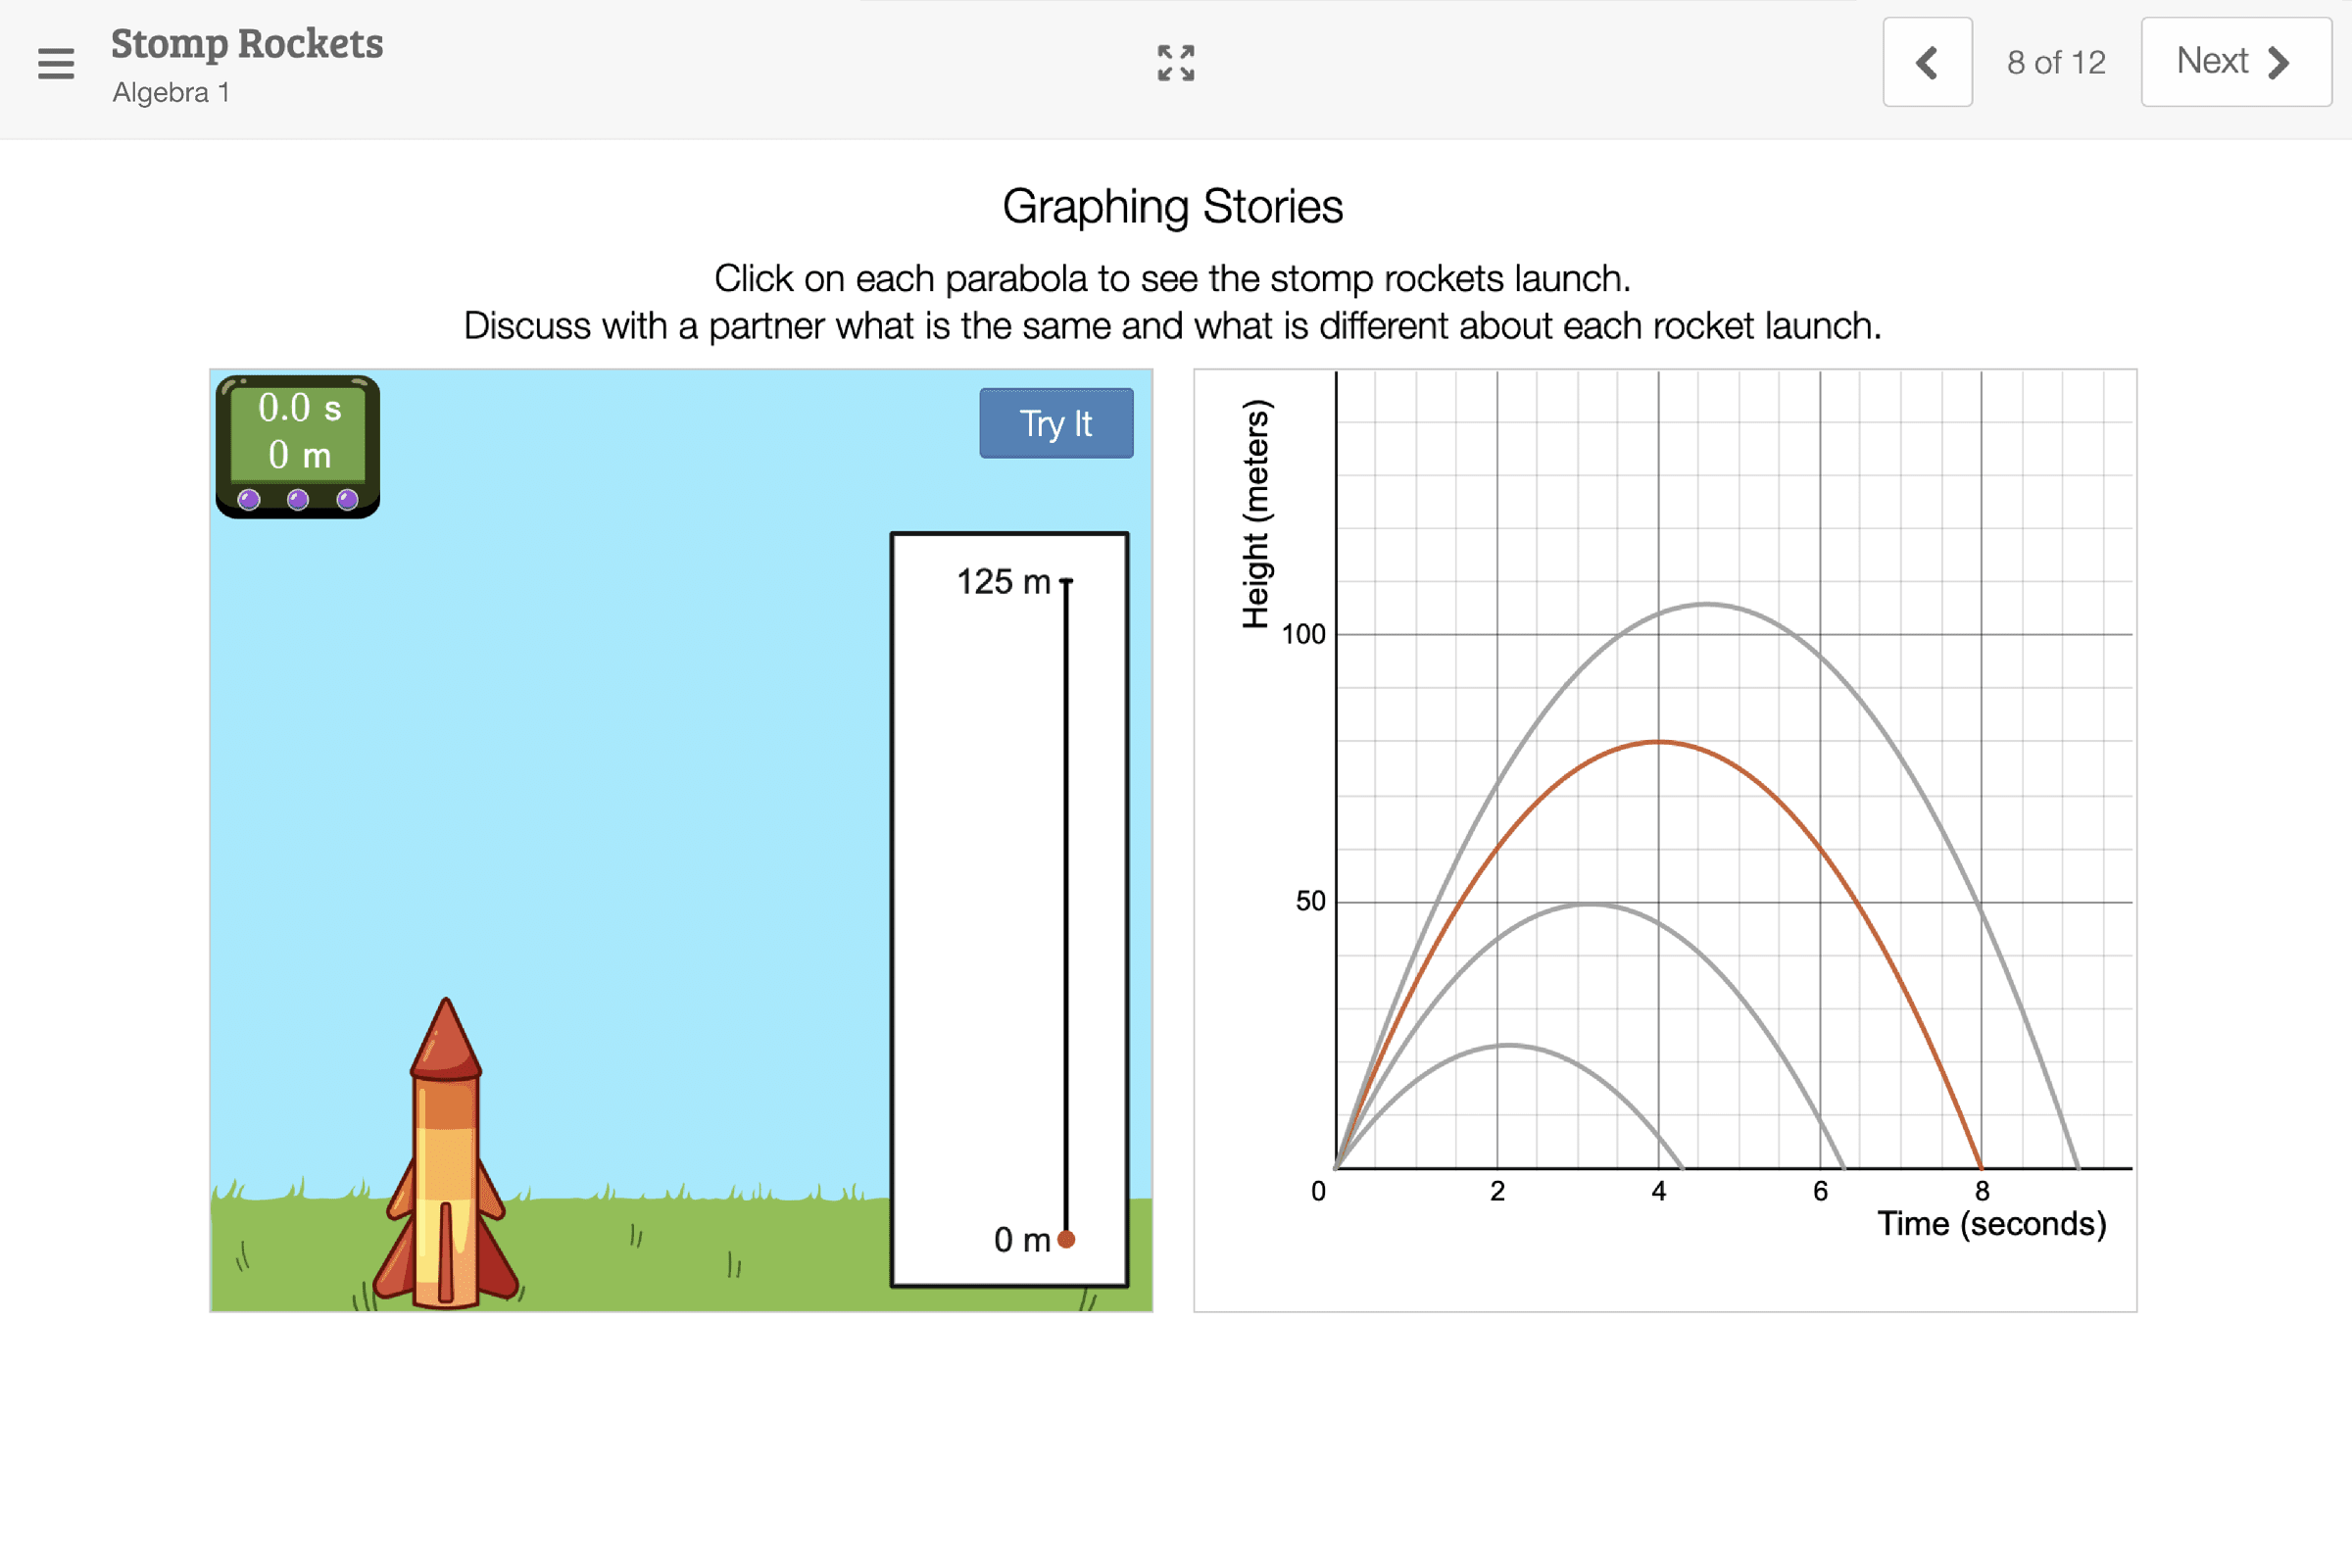 Educational math programs interface showing a simulation with a rocket at ground level on the left, and a graph on the right displaying three rocket trajectory curves.